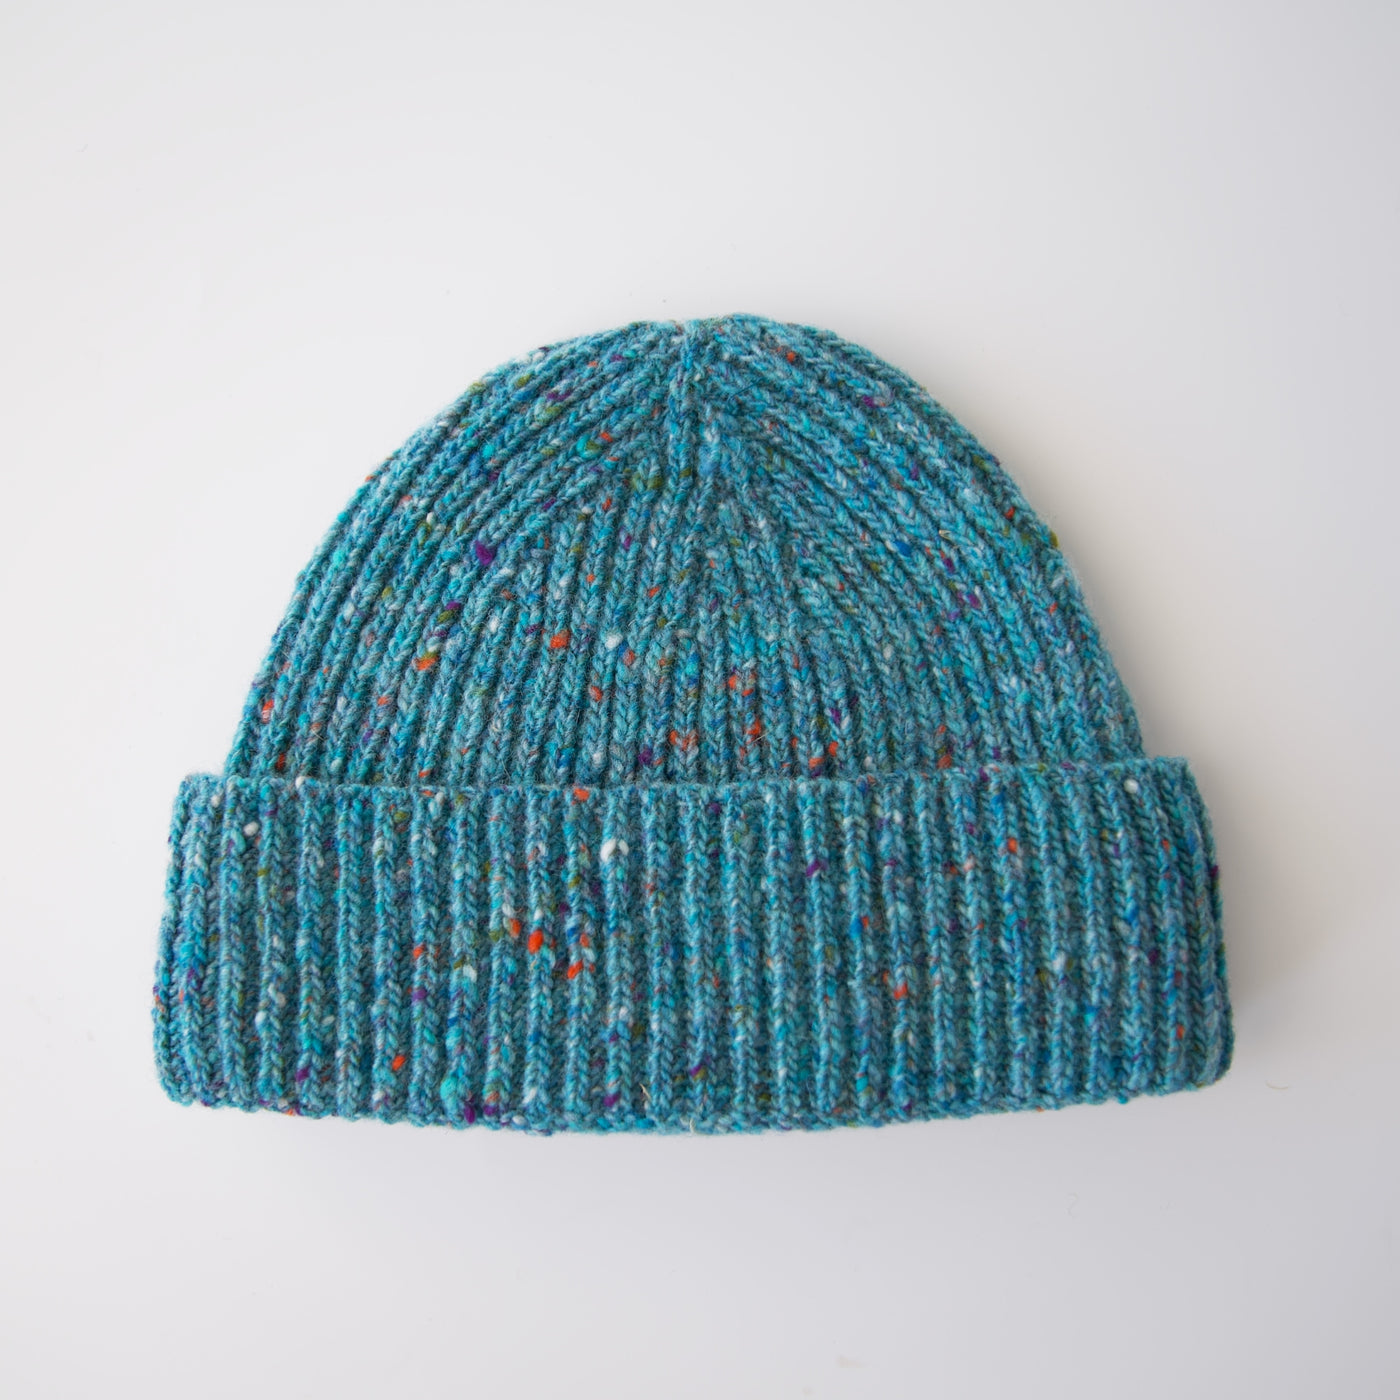 Donegal Tweed Beanie - Turquoise